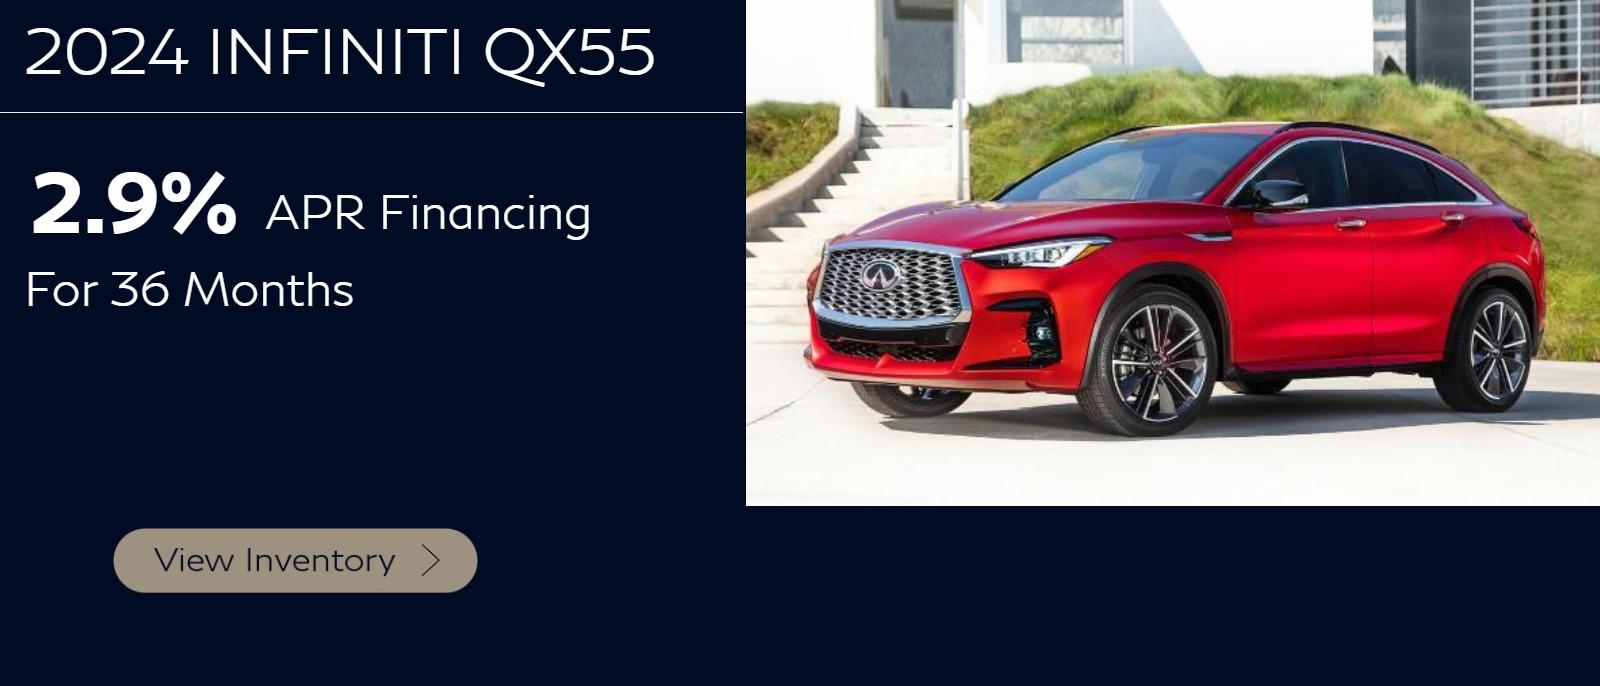 2024 QX55
2.9%* APR Financing FOR UP TO 36 Months